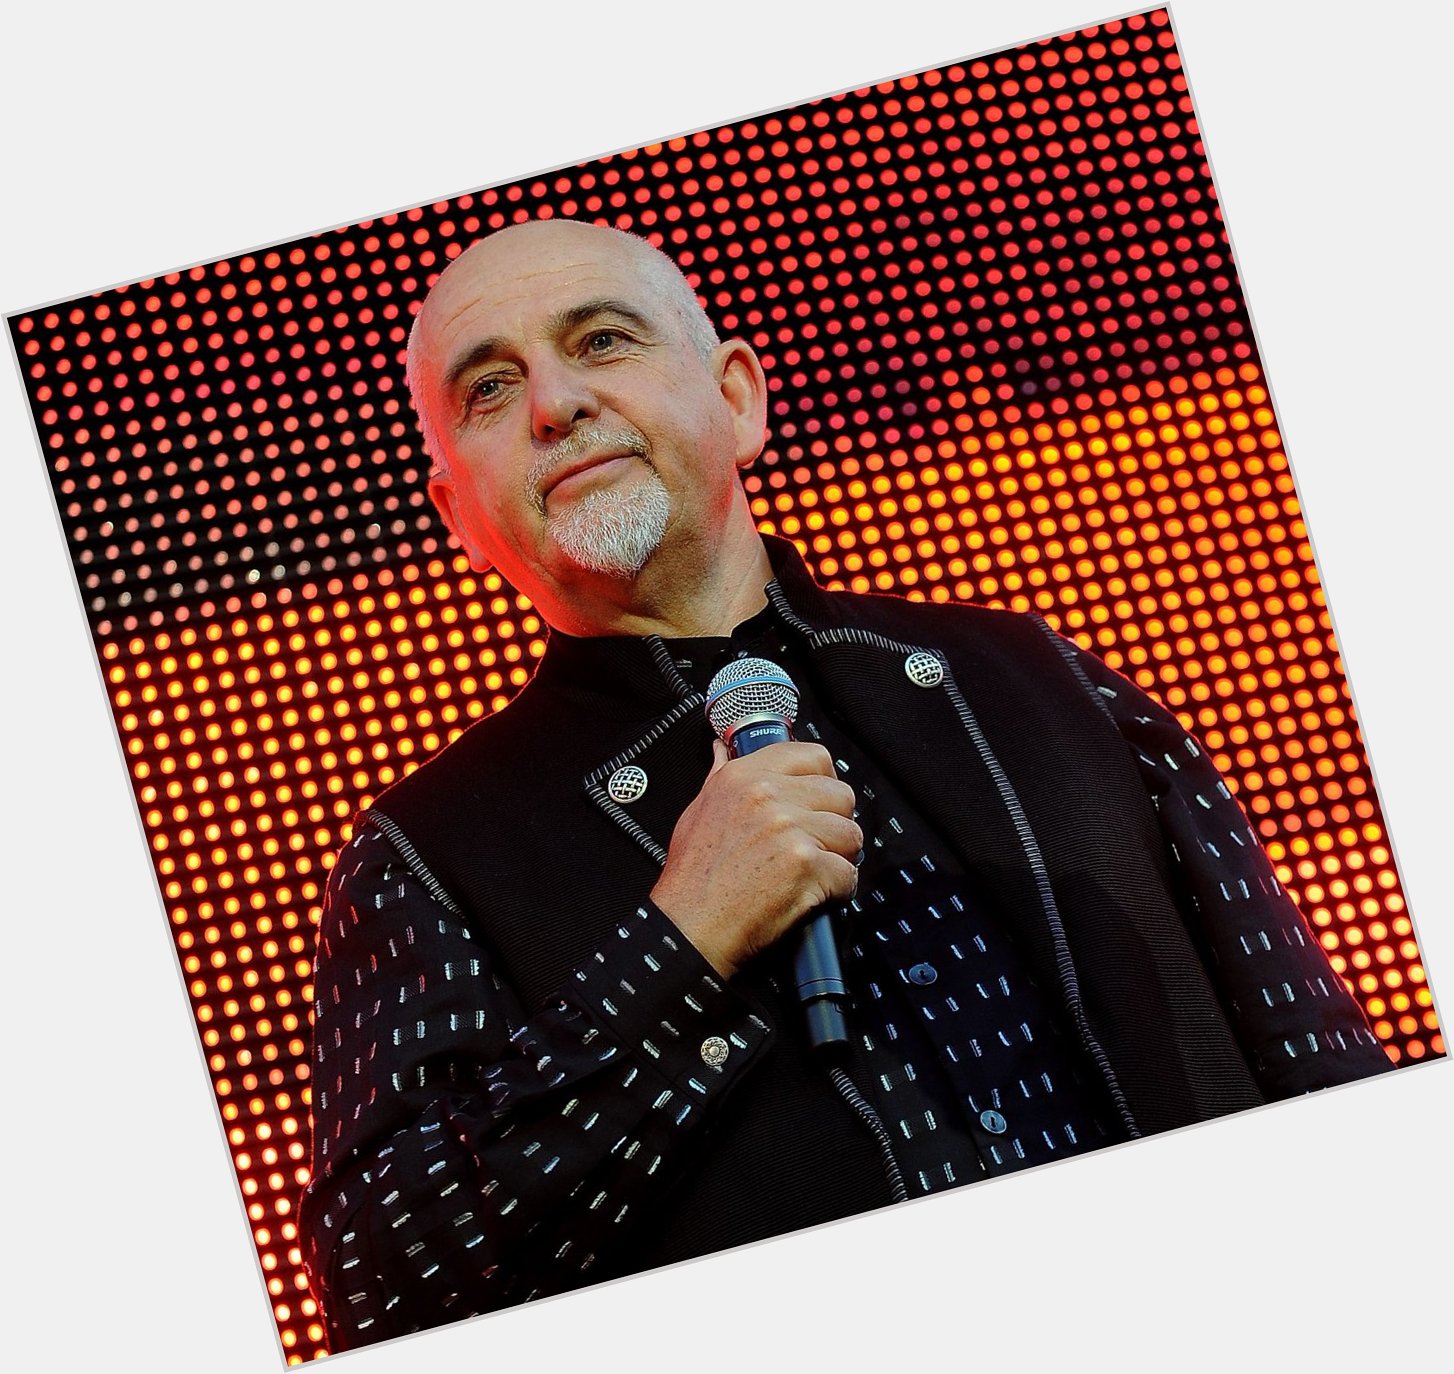 Peter Gabriel celebrates his 70th birthday today! Many happy returns to a legend of British music. 